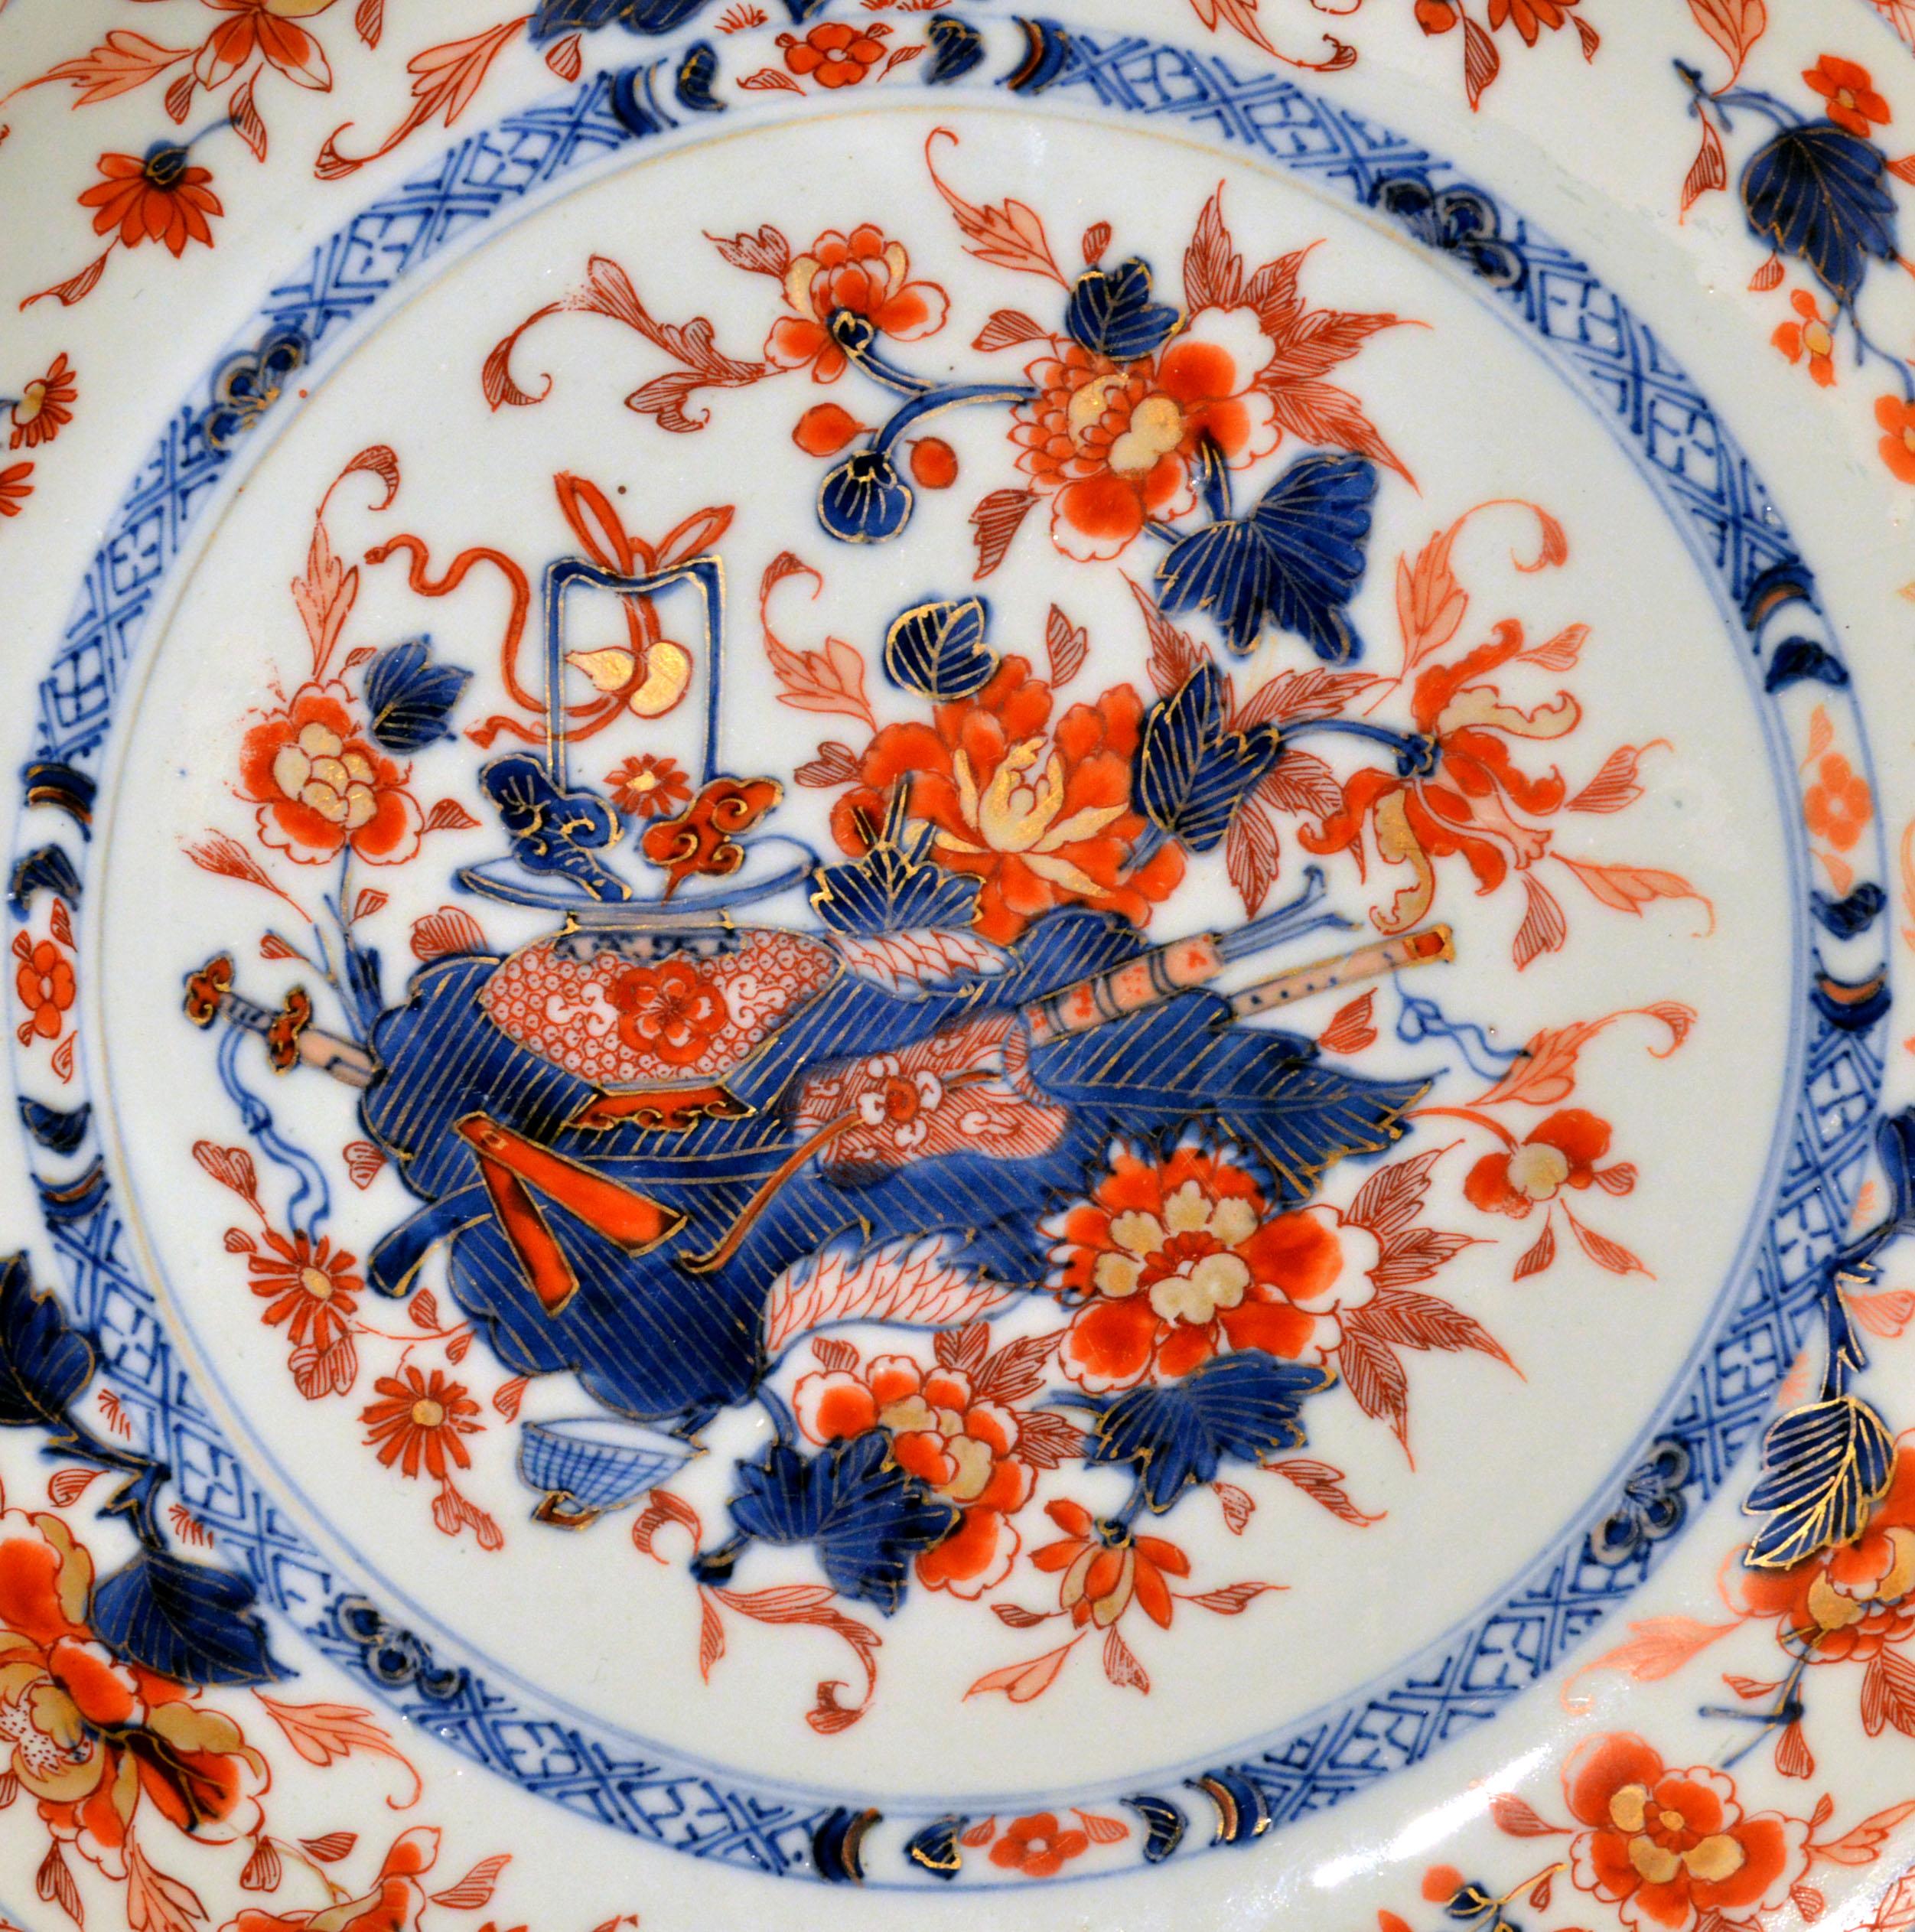 Chinese Export Imari large porcelain saucer dish 
circa 1770


The Chinese Export Imari Porcelain saucer dish is painted in the central well with a group of precious objects on an acanthus leaf surrounded by flowering plants enclosed by an